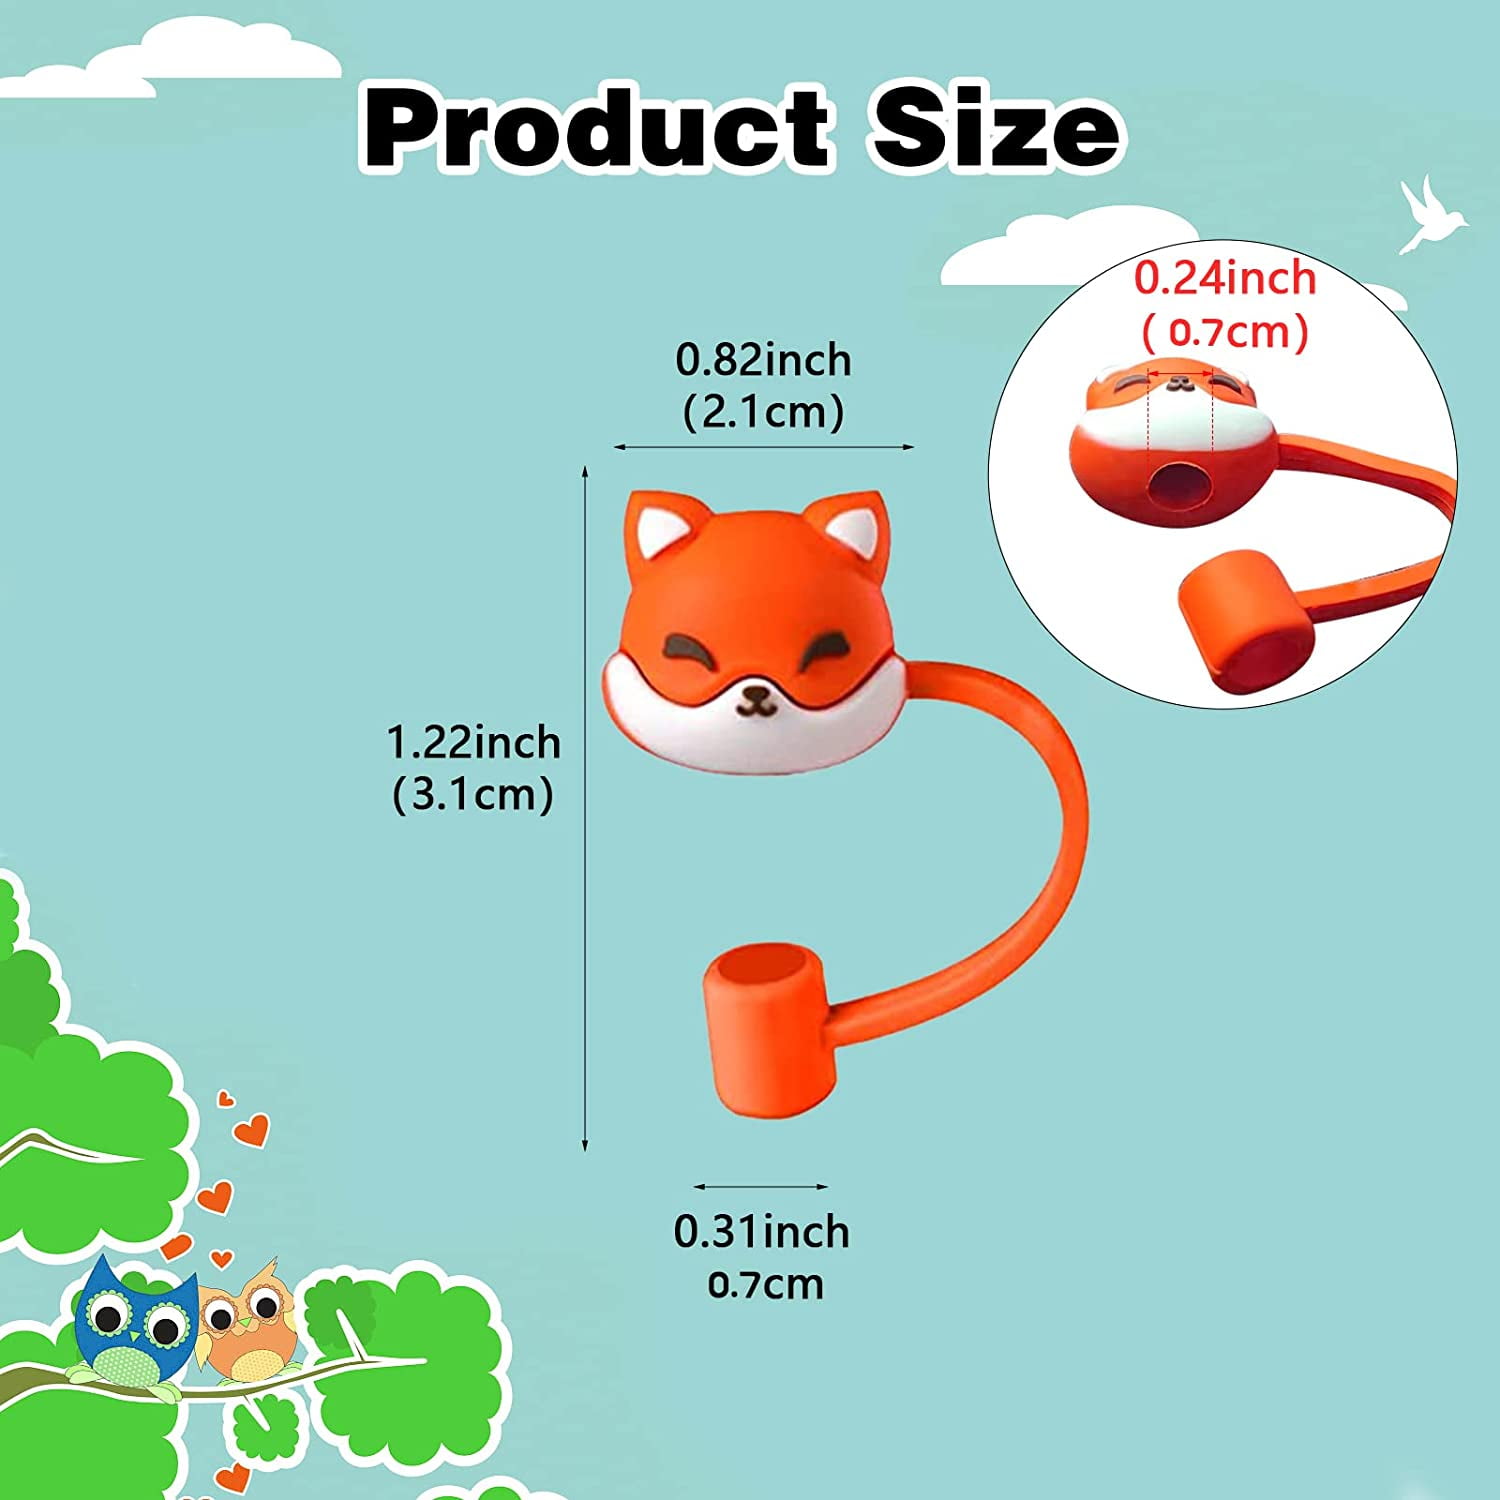 GLEAVI 8pcs Animals Straw Tips Cover Reusable Cute Frog Straw Toppers Straw  Cover Plugs for Drinking Straws Party Straw Caps Decoration